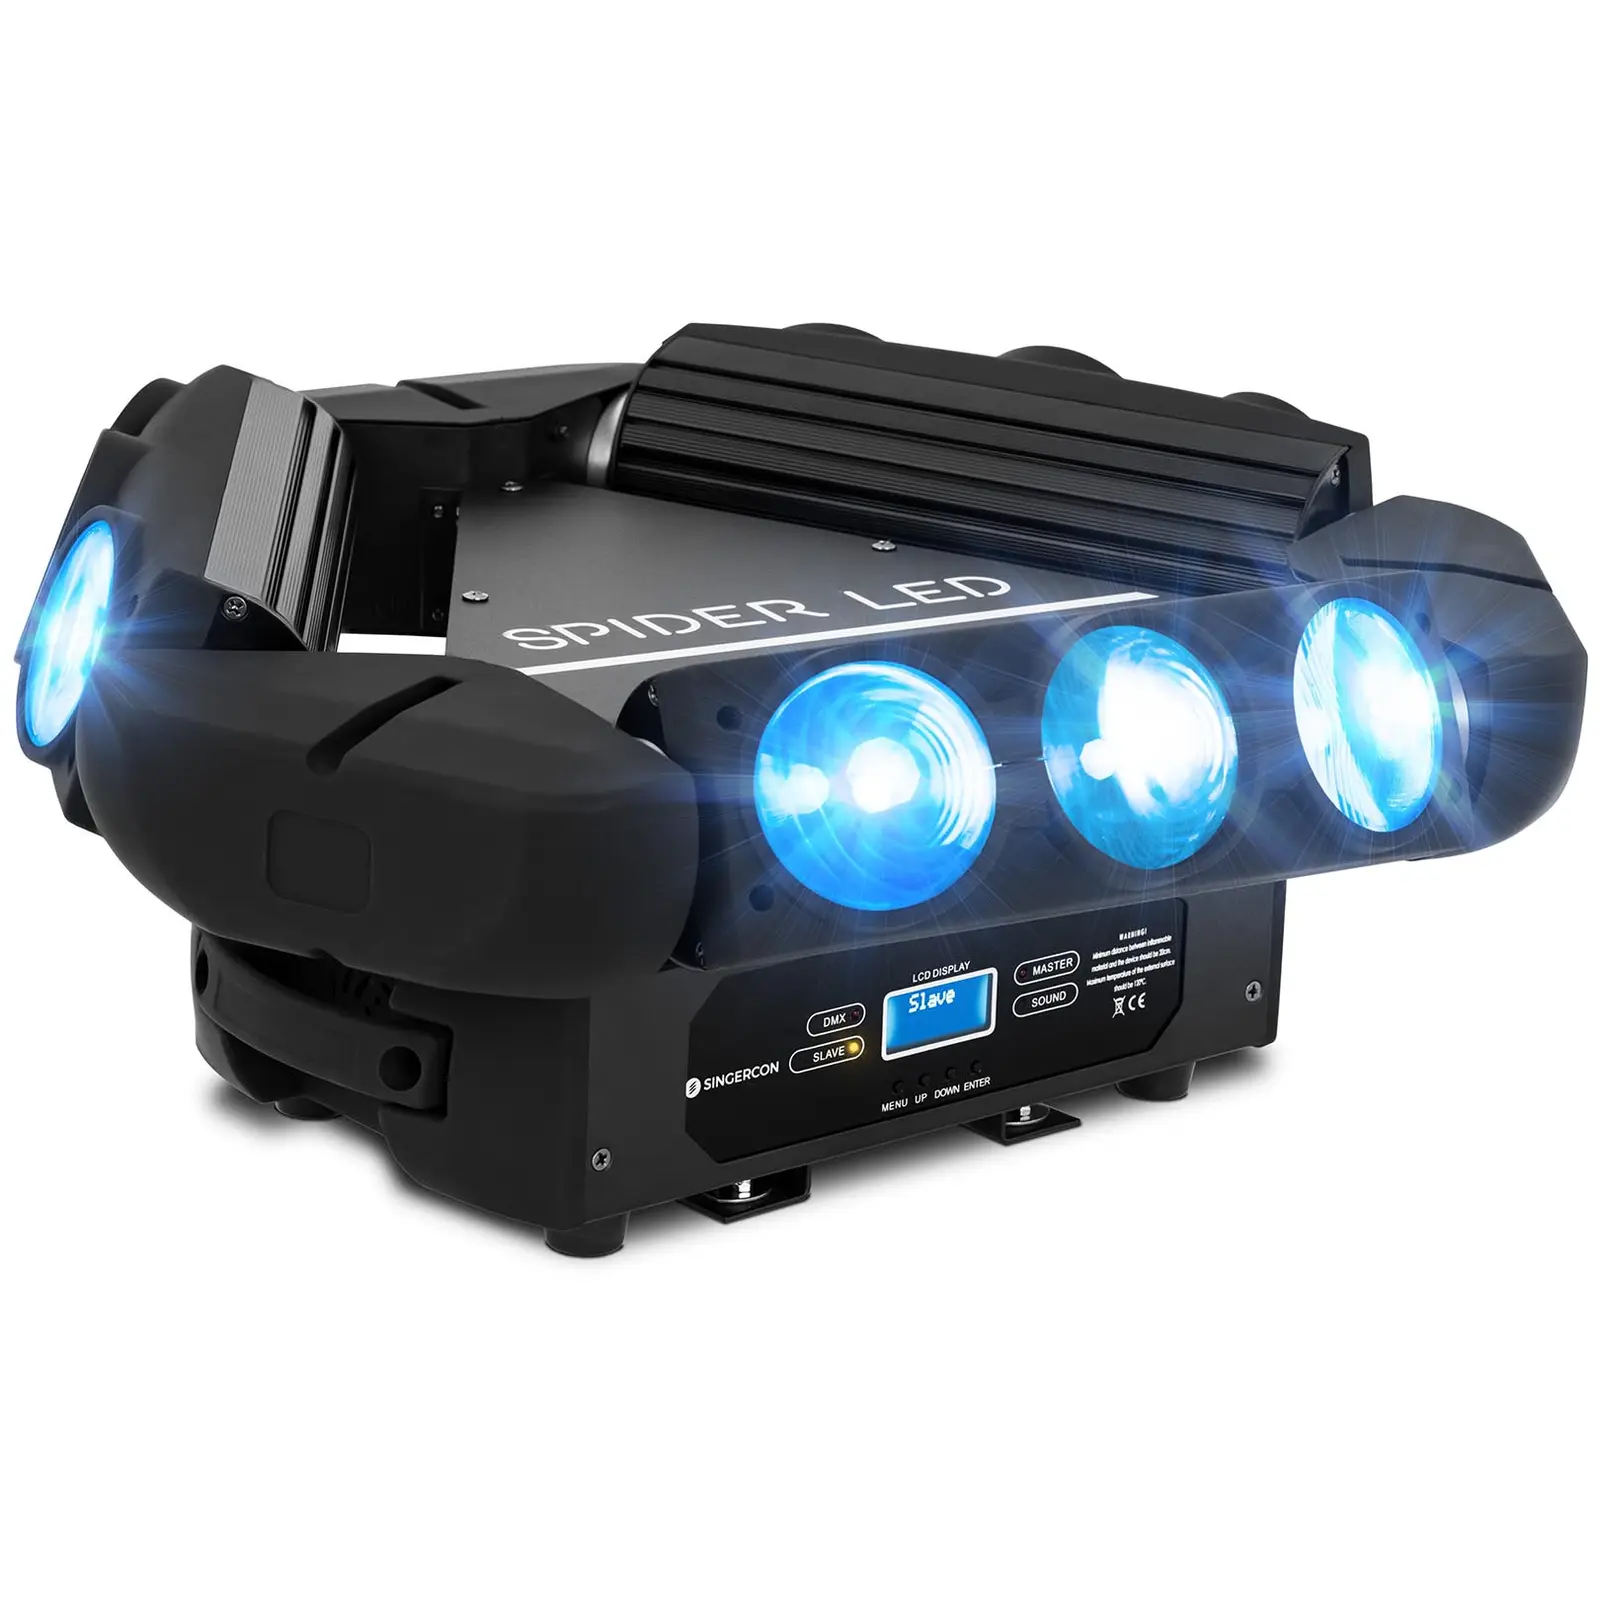 Spider Moving Head - 9 LED-lampor - 100 W